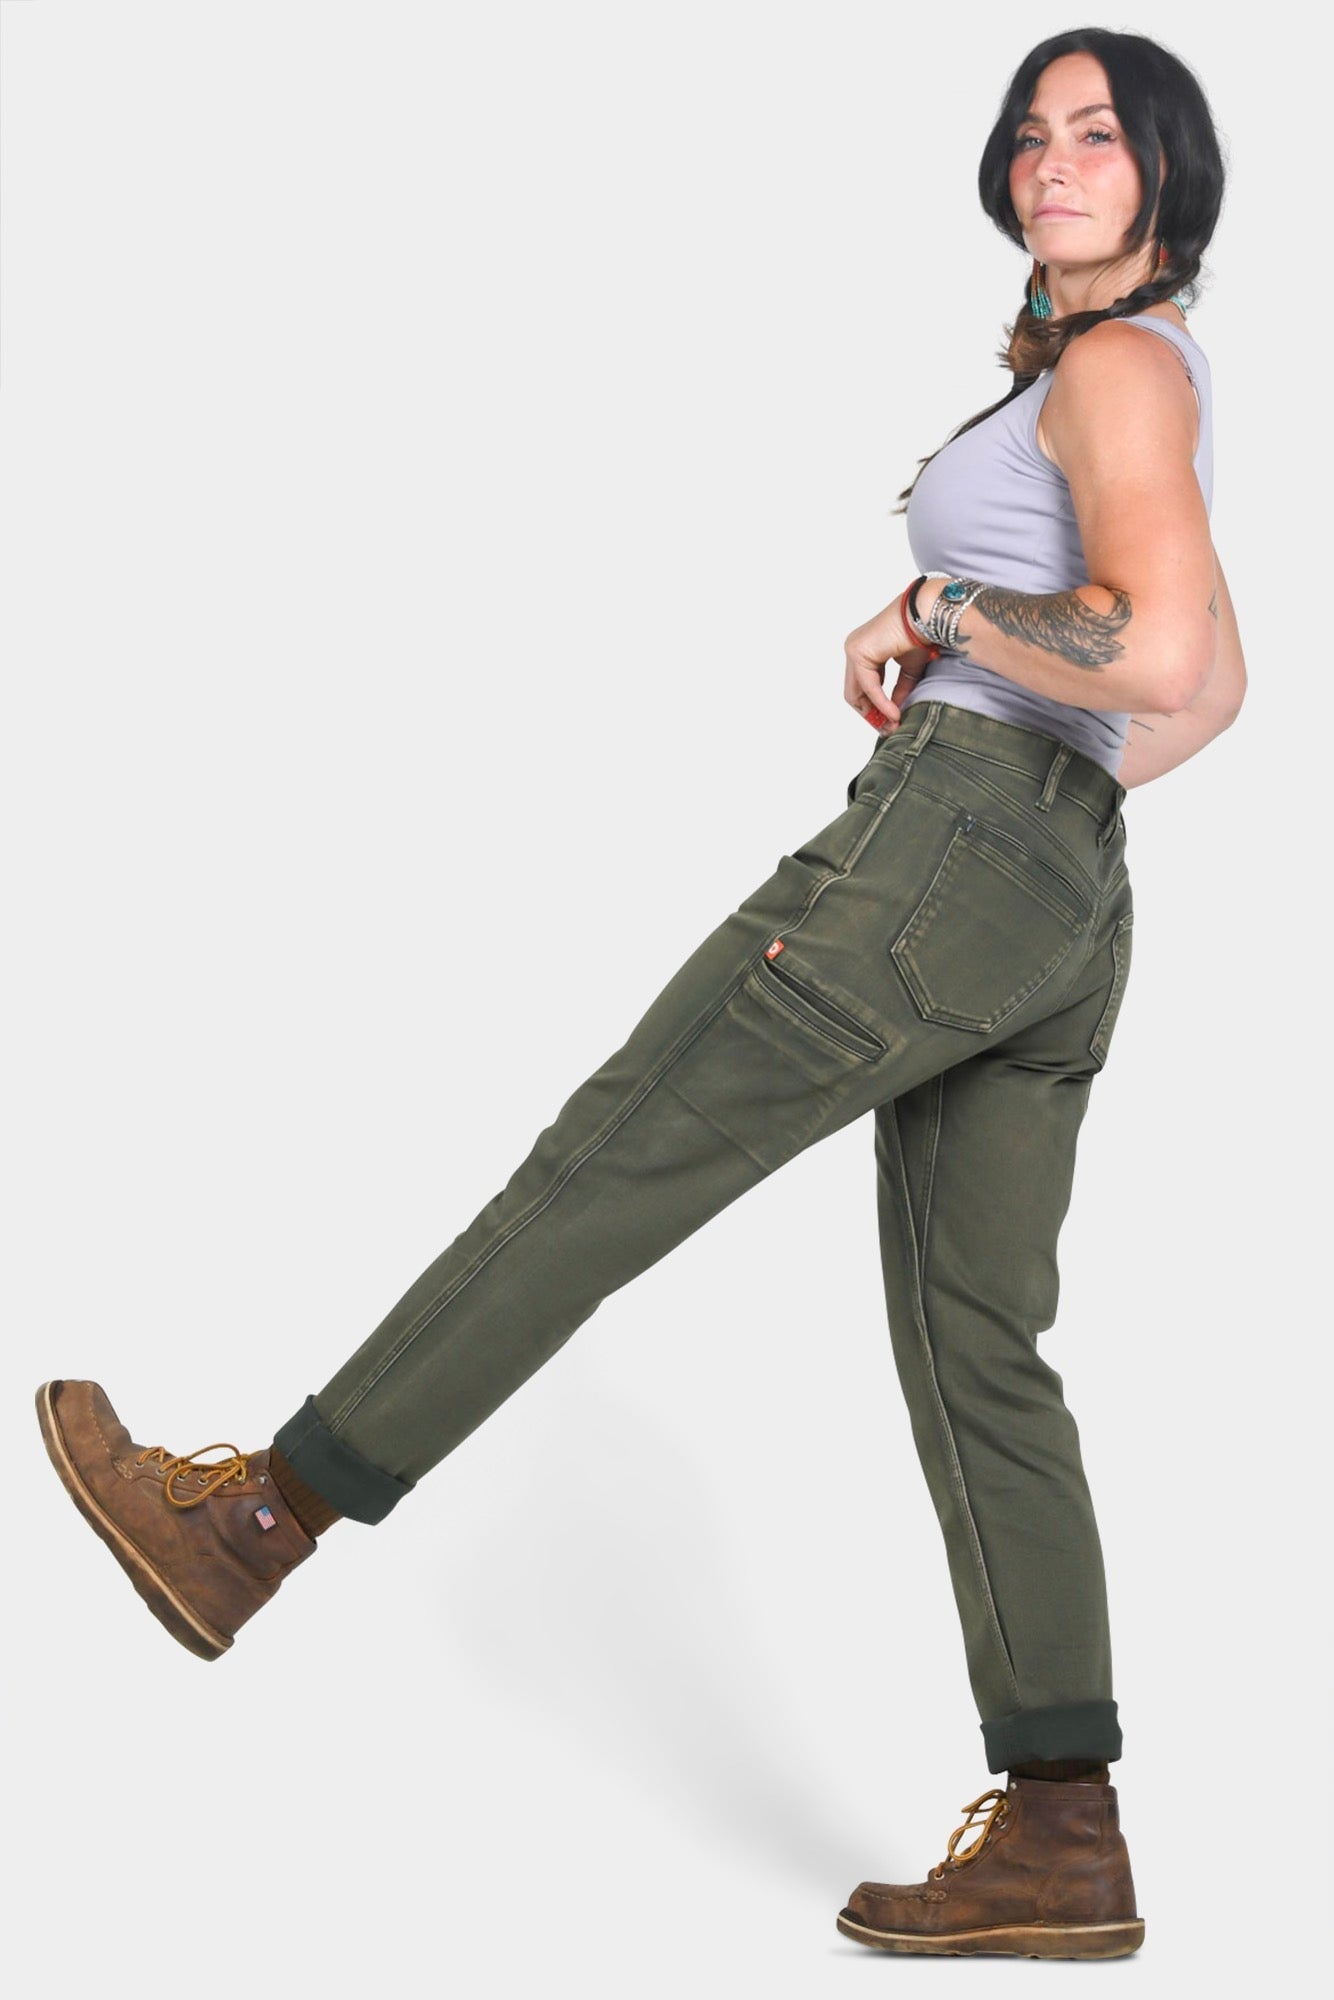 Dovetail Workwear Day Construct Cargo Pants for Women, Relaxed Fit, 10  Functional Pockets